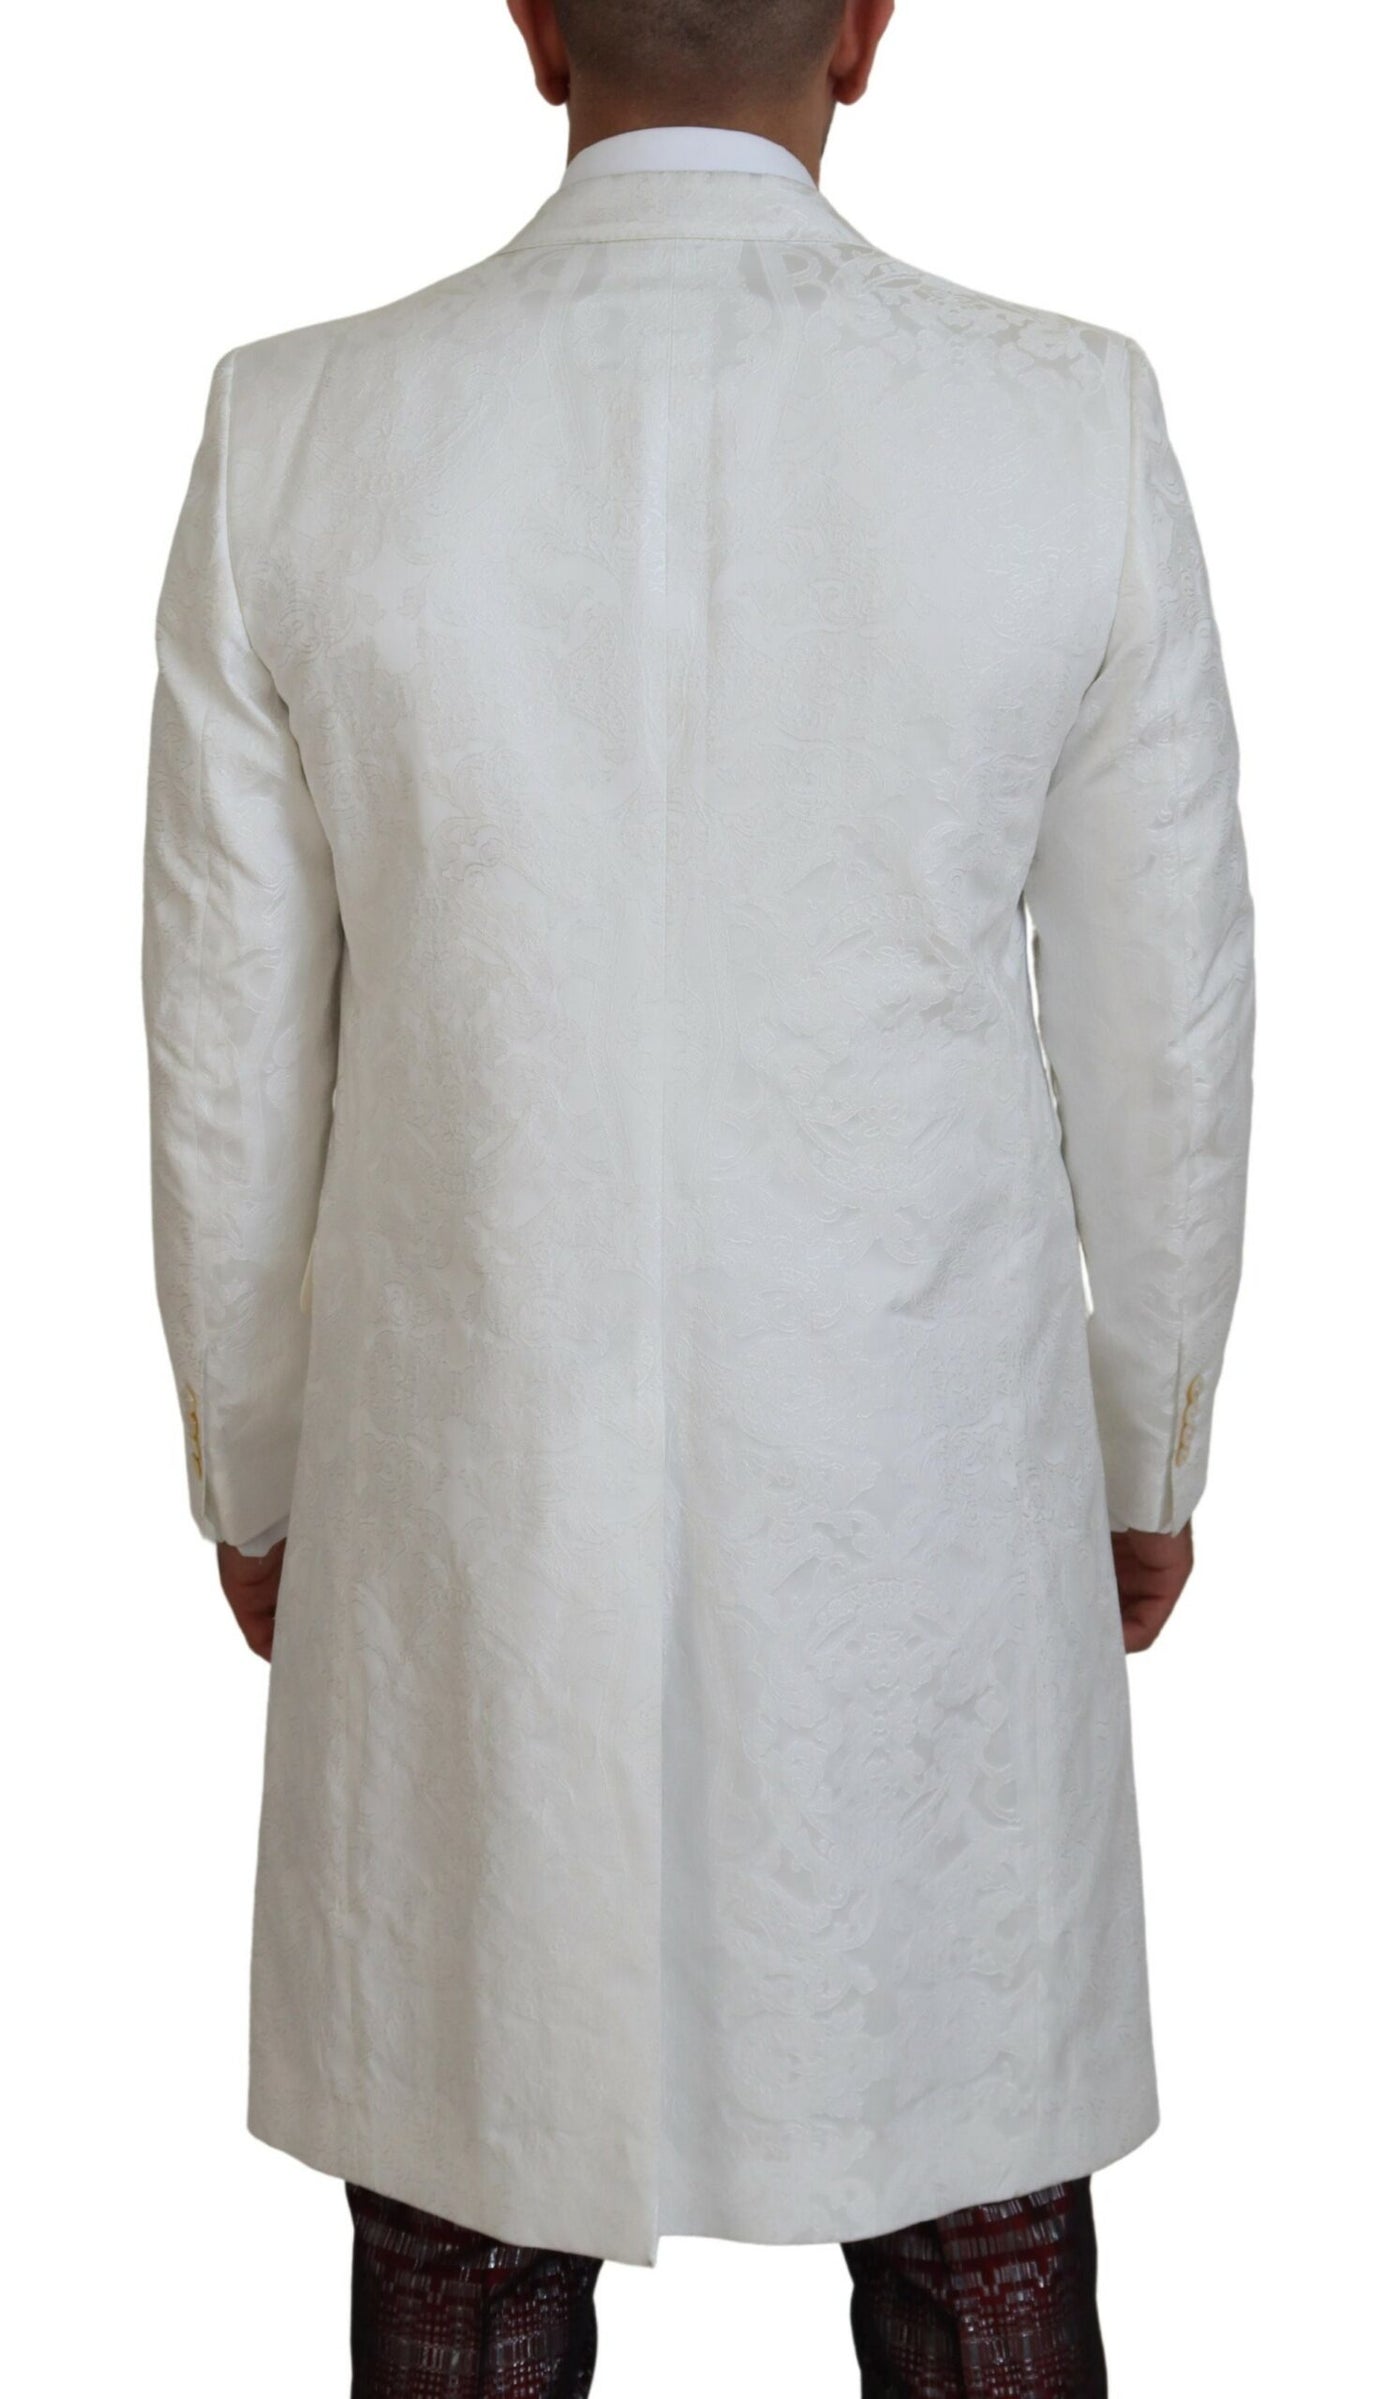 Dolce & Gabbana White Floral Brocade Trench Coat Jacket